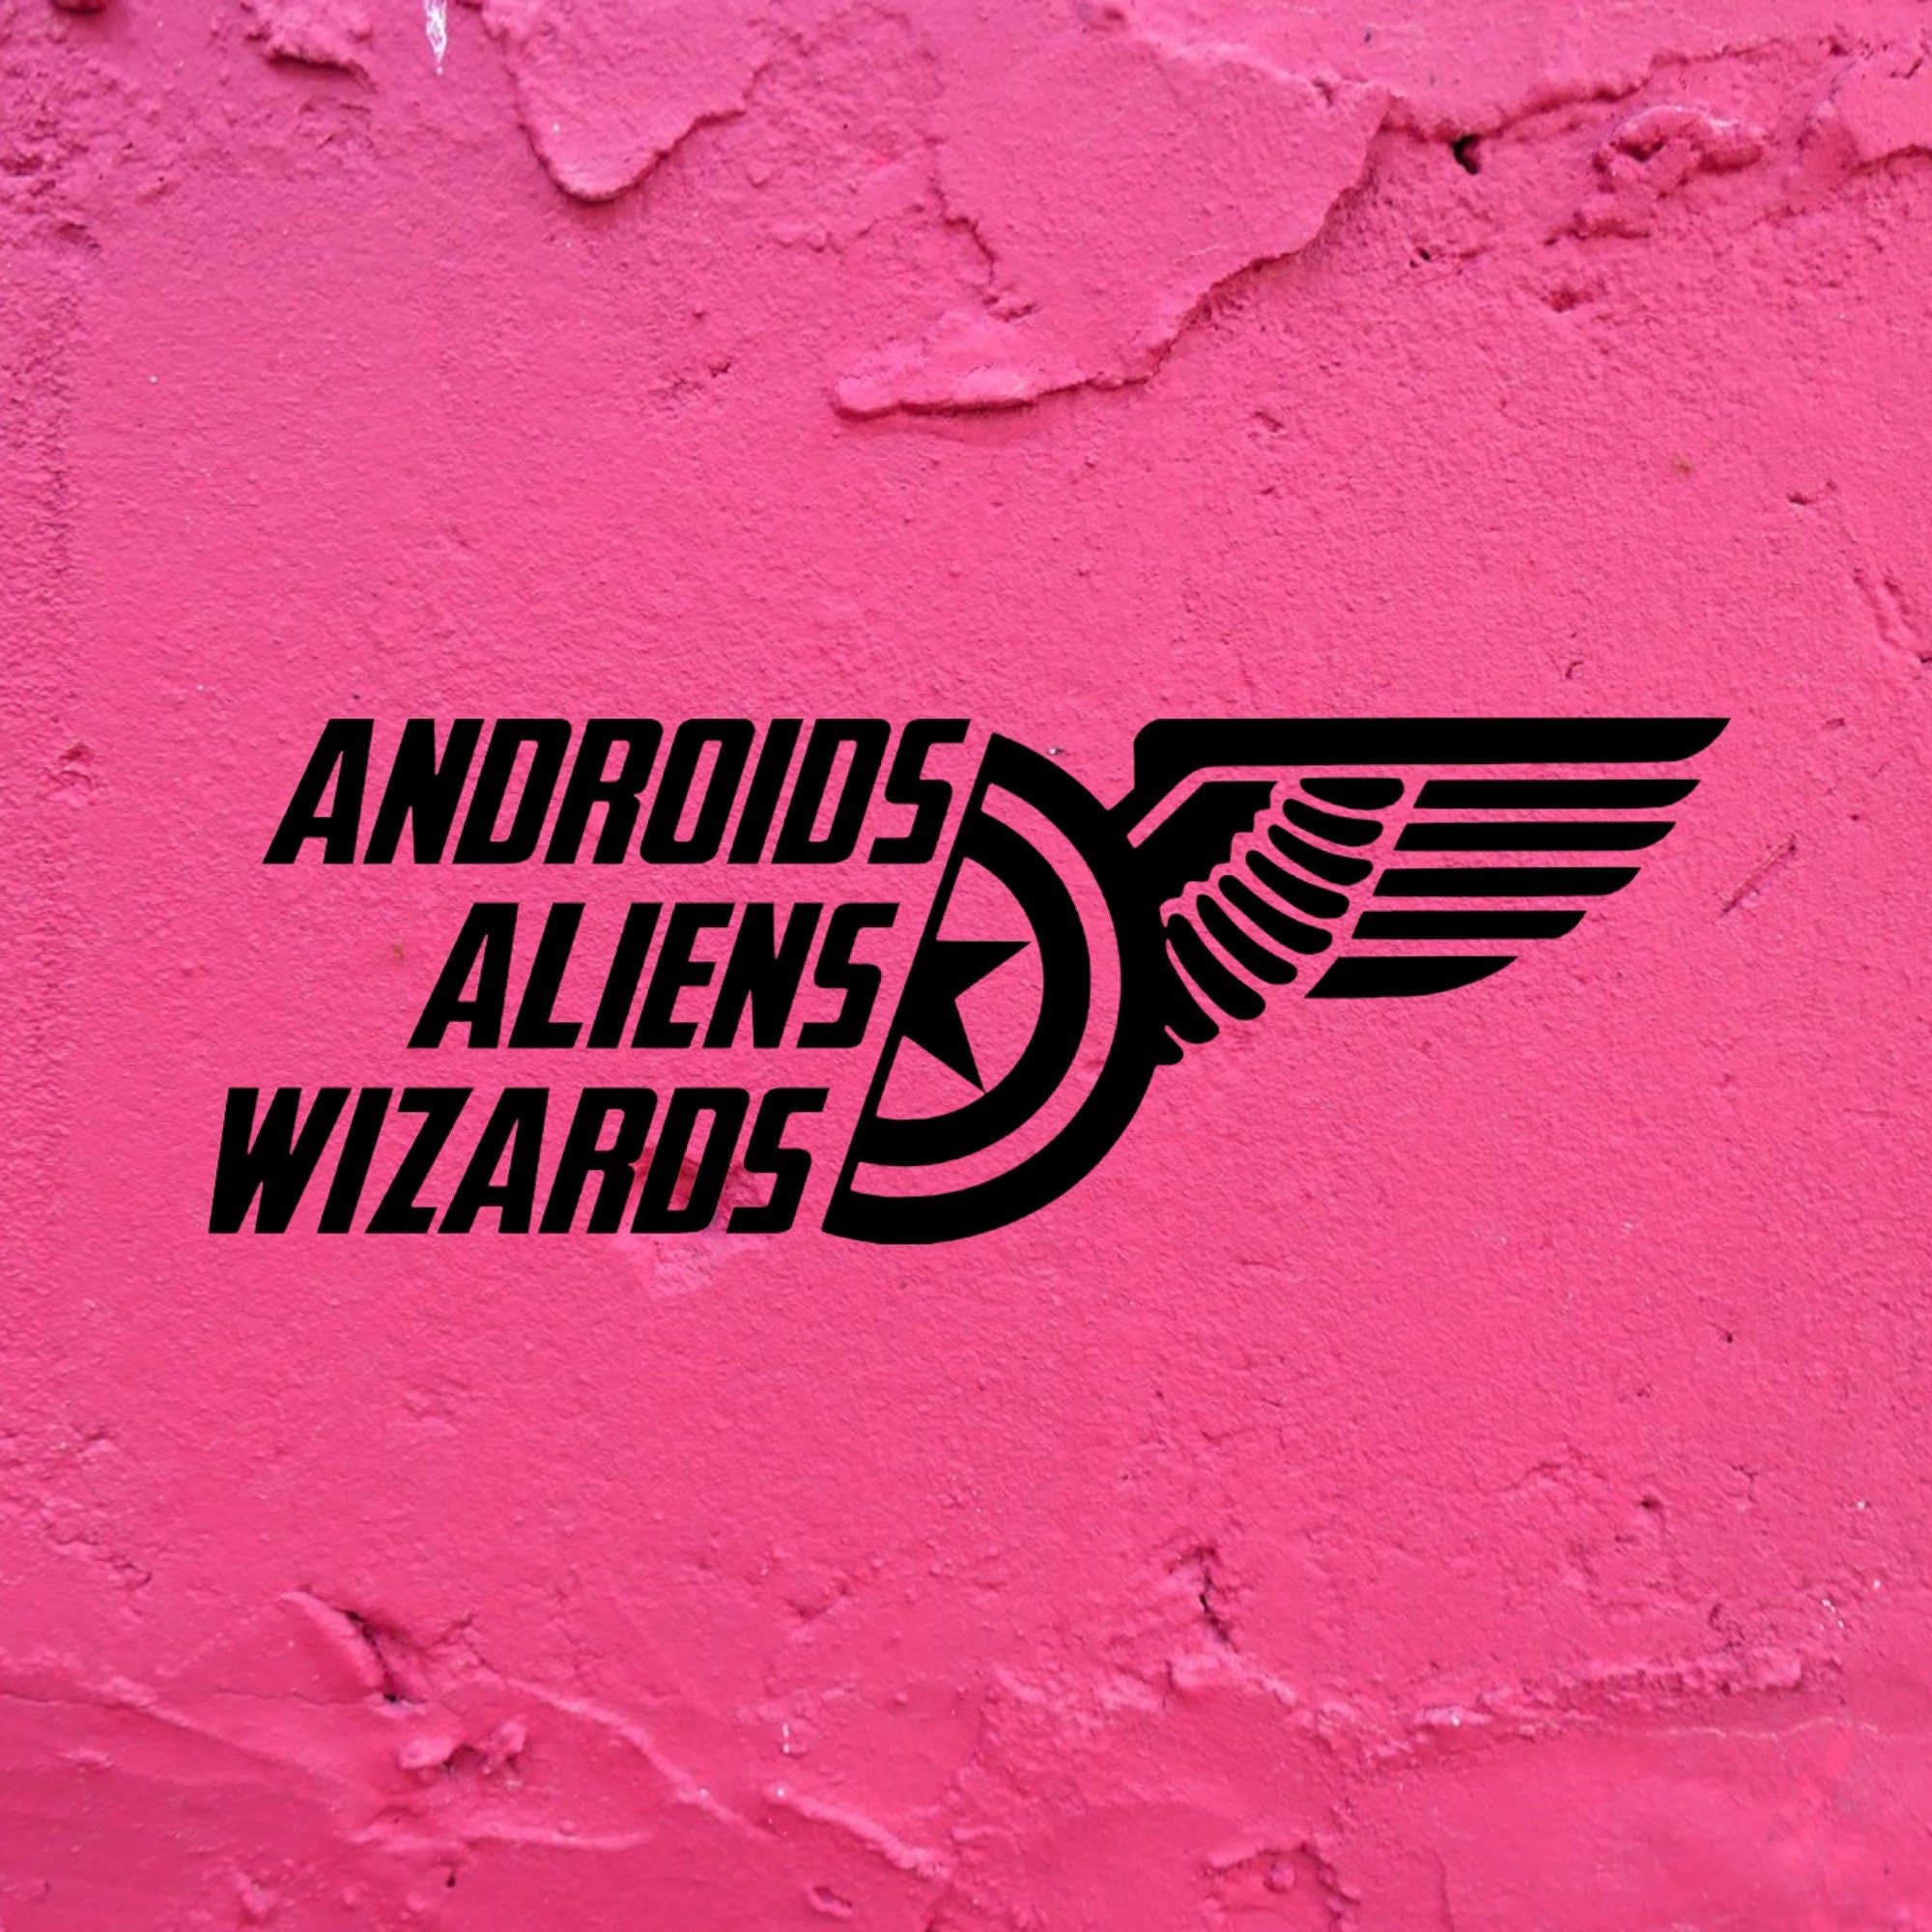 FATWS Big 3 Androids Aliens Wizards Decal in White or Black